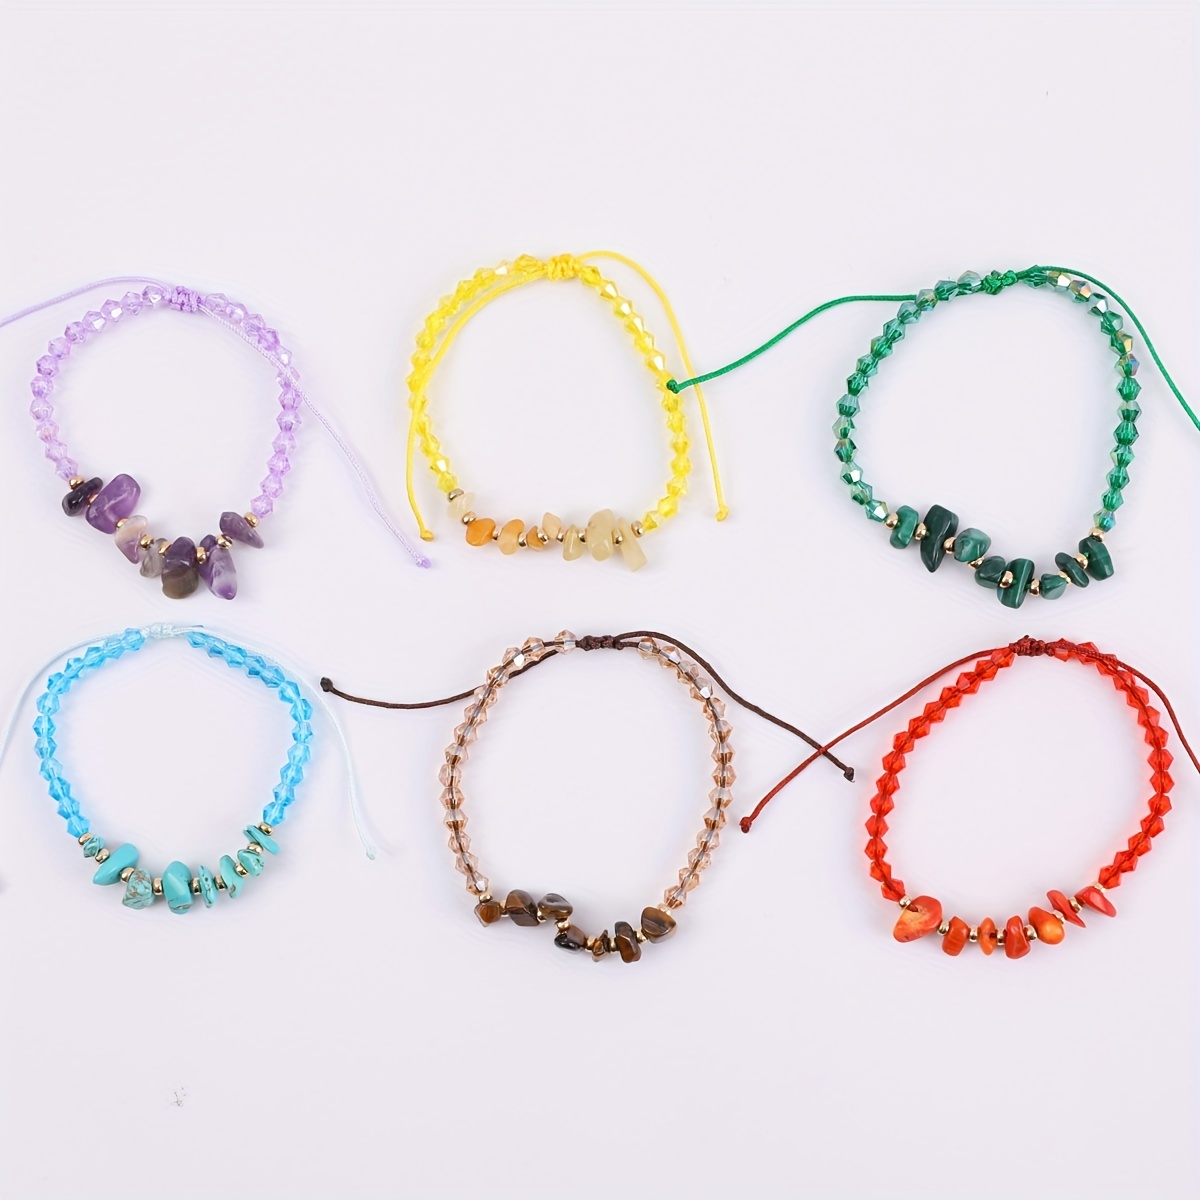 6pcs/set Bohemian Handmade Clay Beads Friendship Bracelet, Handmade Colorful Link Chain Bracelet, Stackable & Stretchable Party Clothing